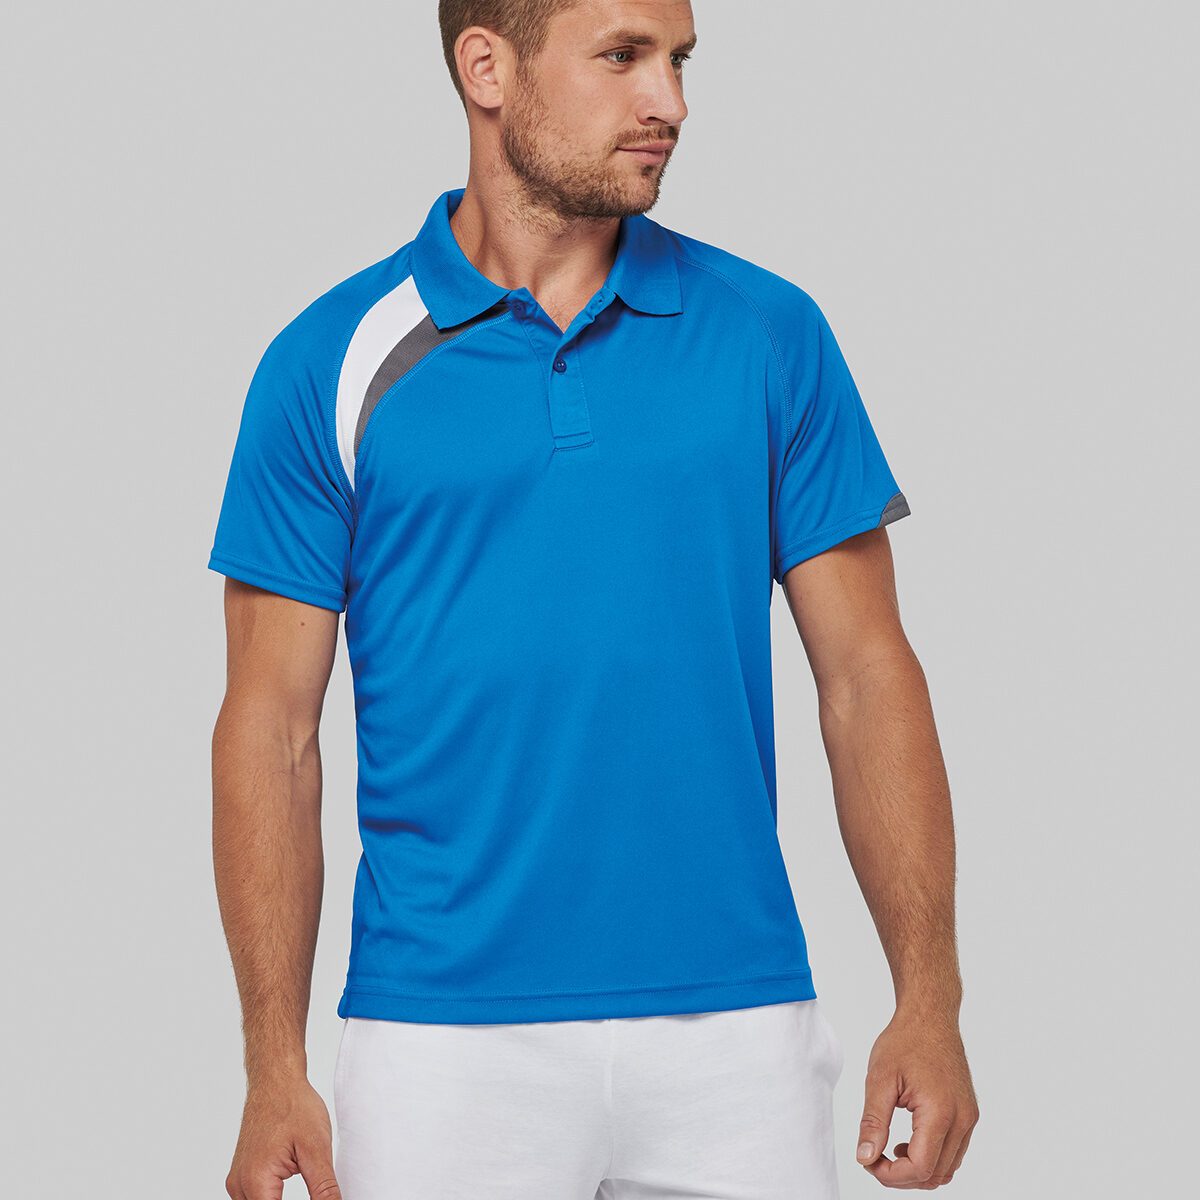 Adults' short-sleeved sports polo shirt